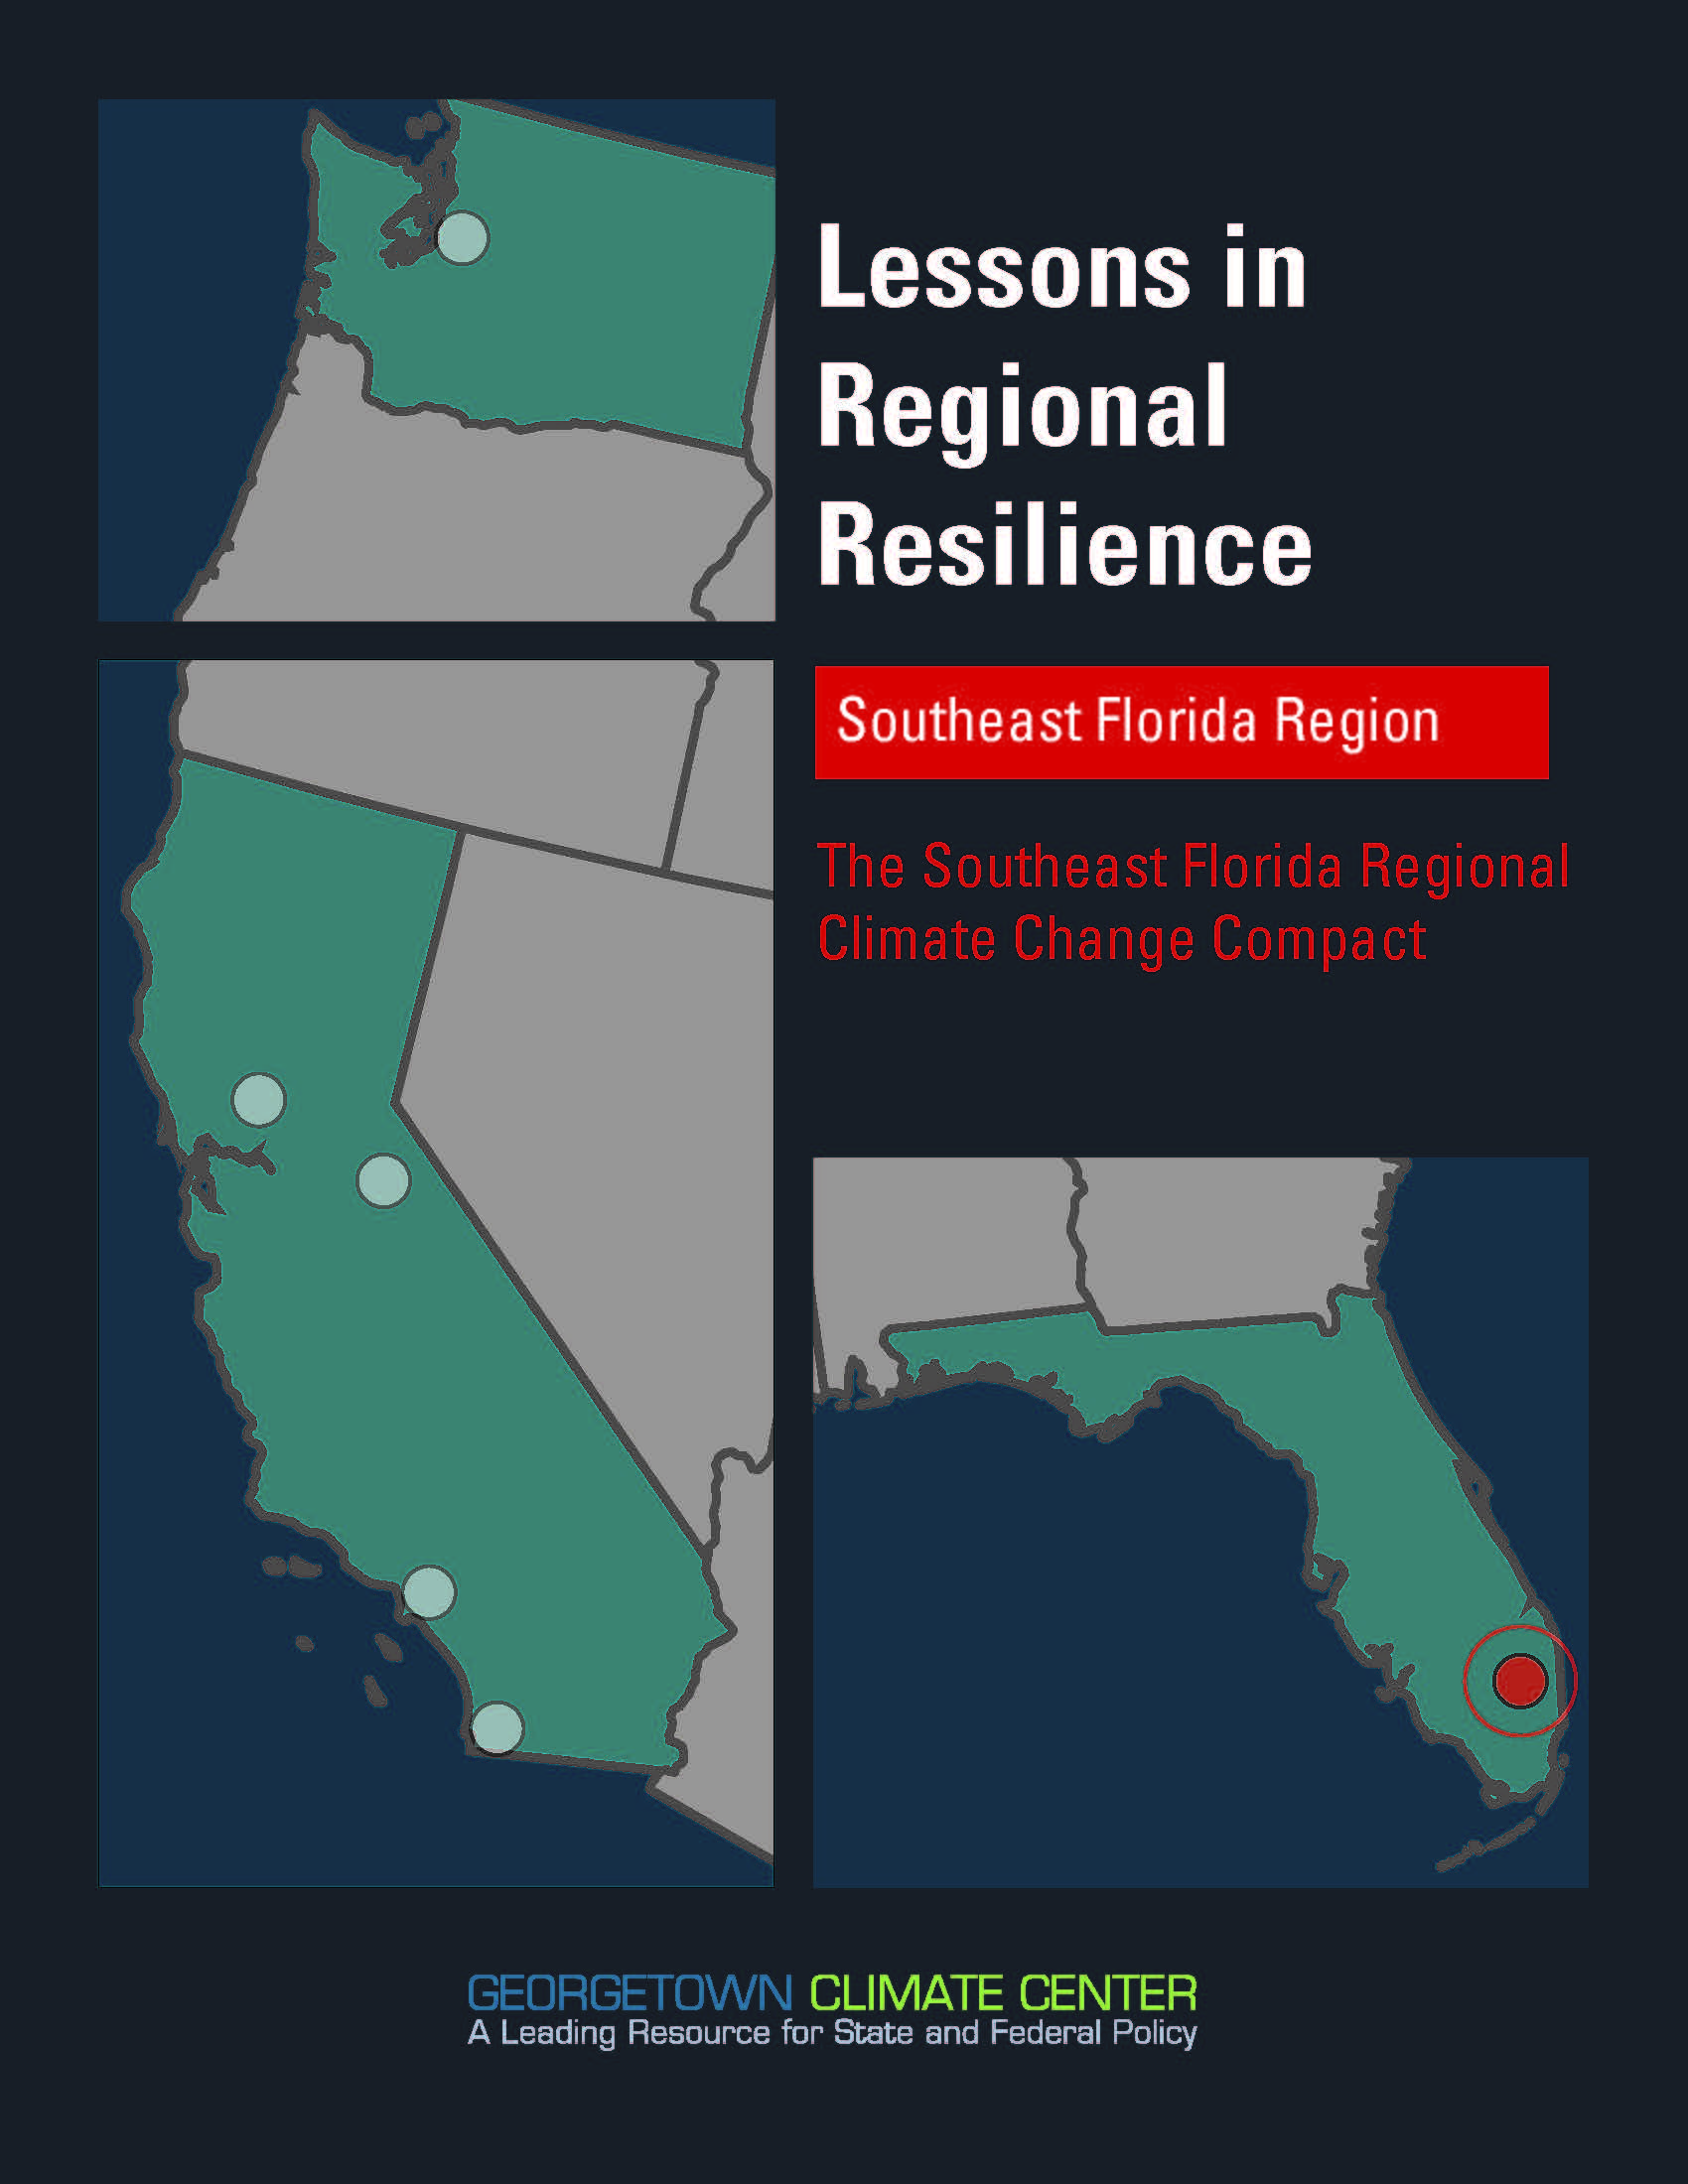 Lessons in Regional Resilience: The Southeast Florida Regional Climate Change Compact